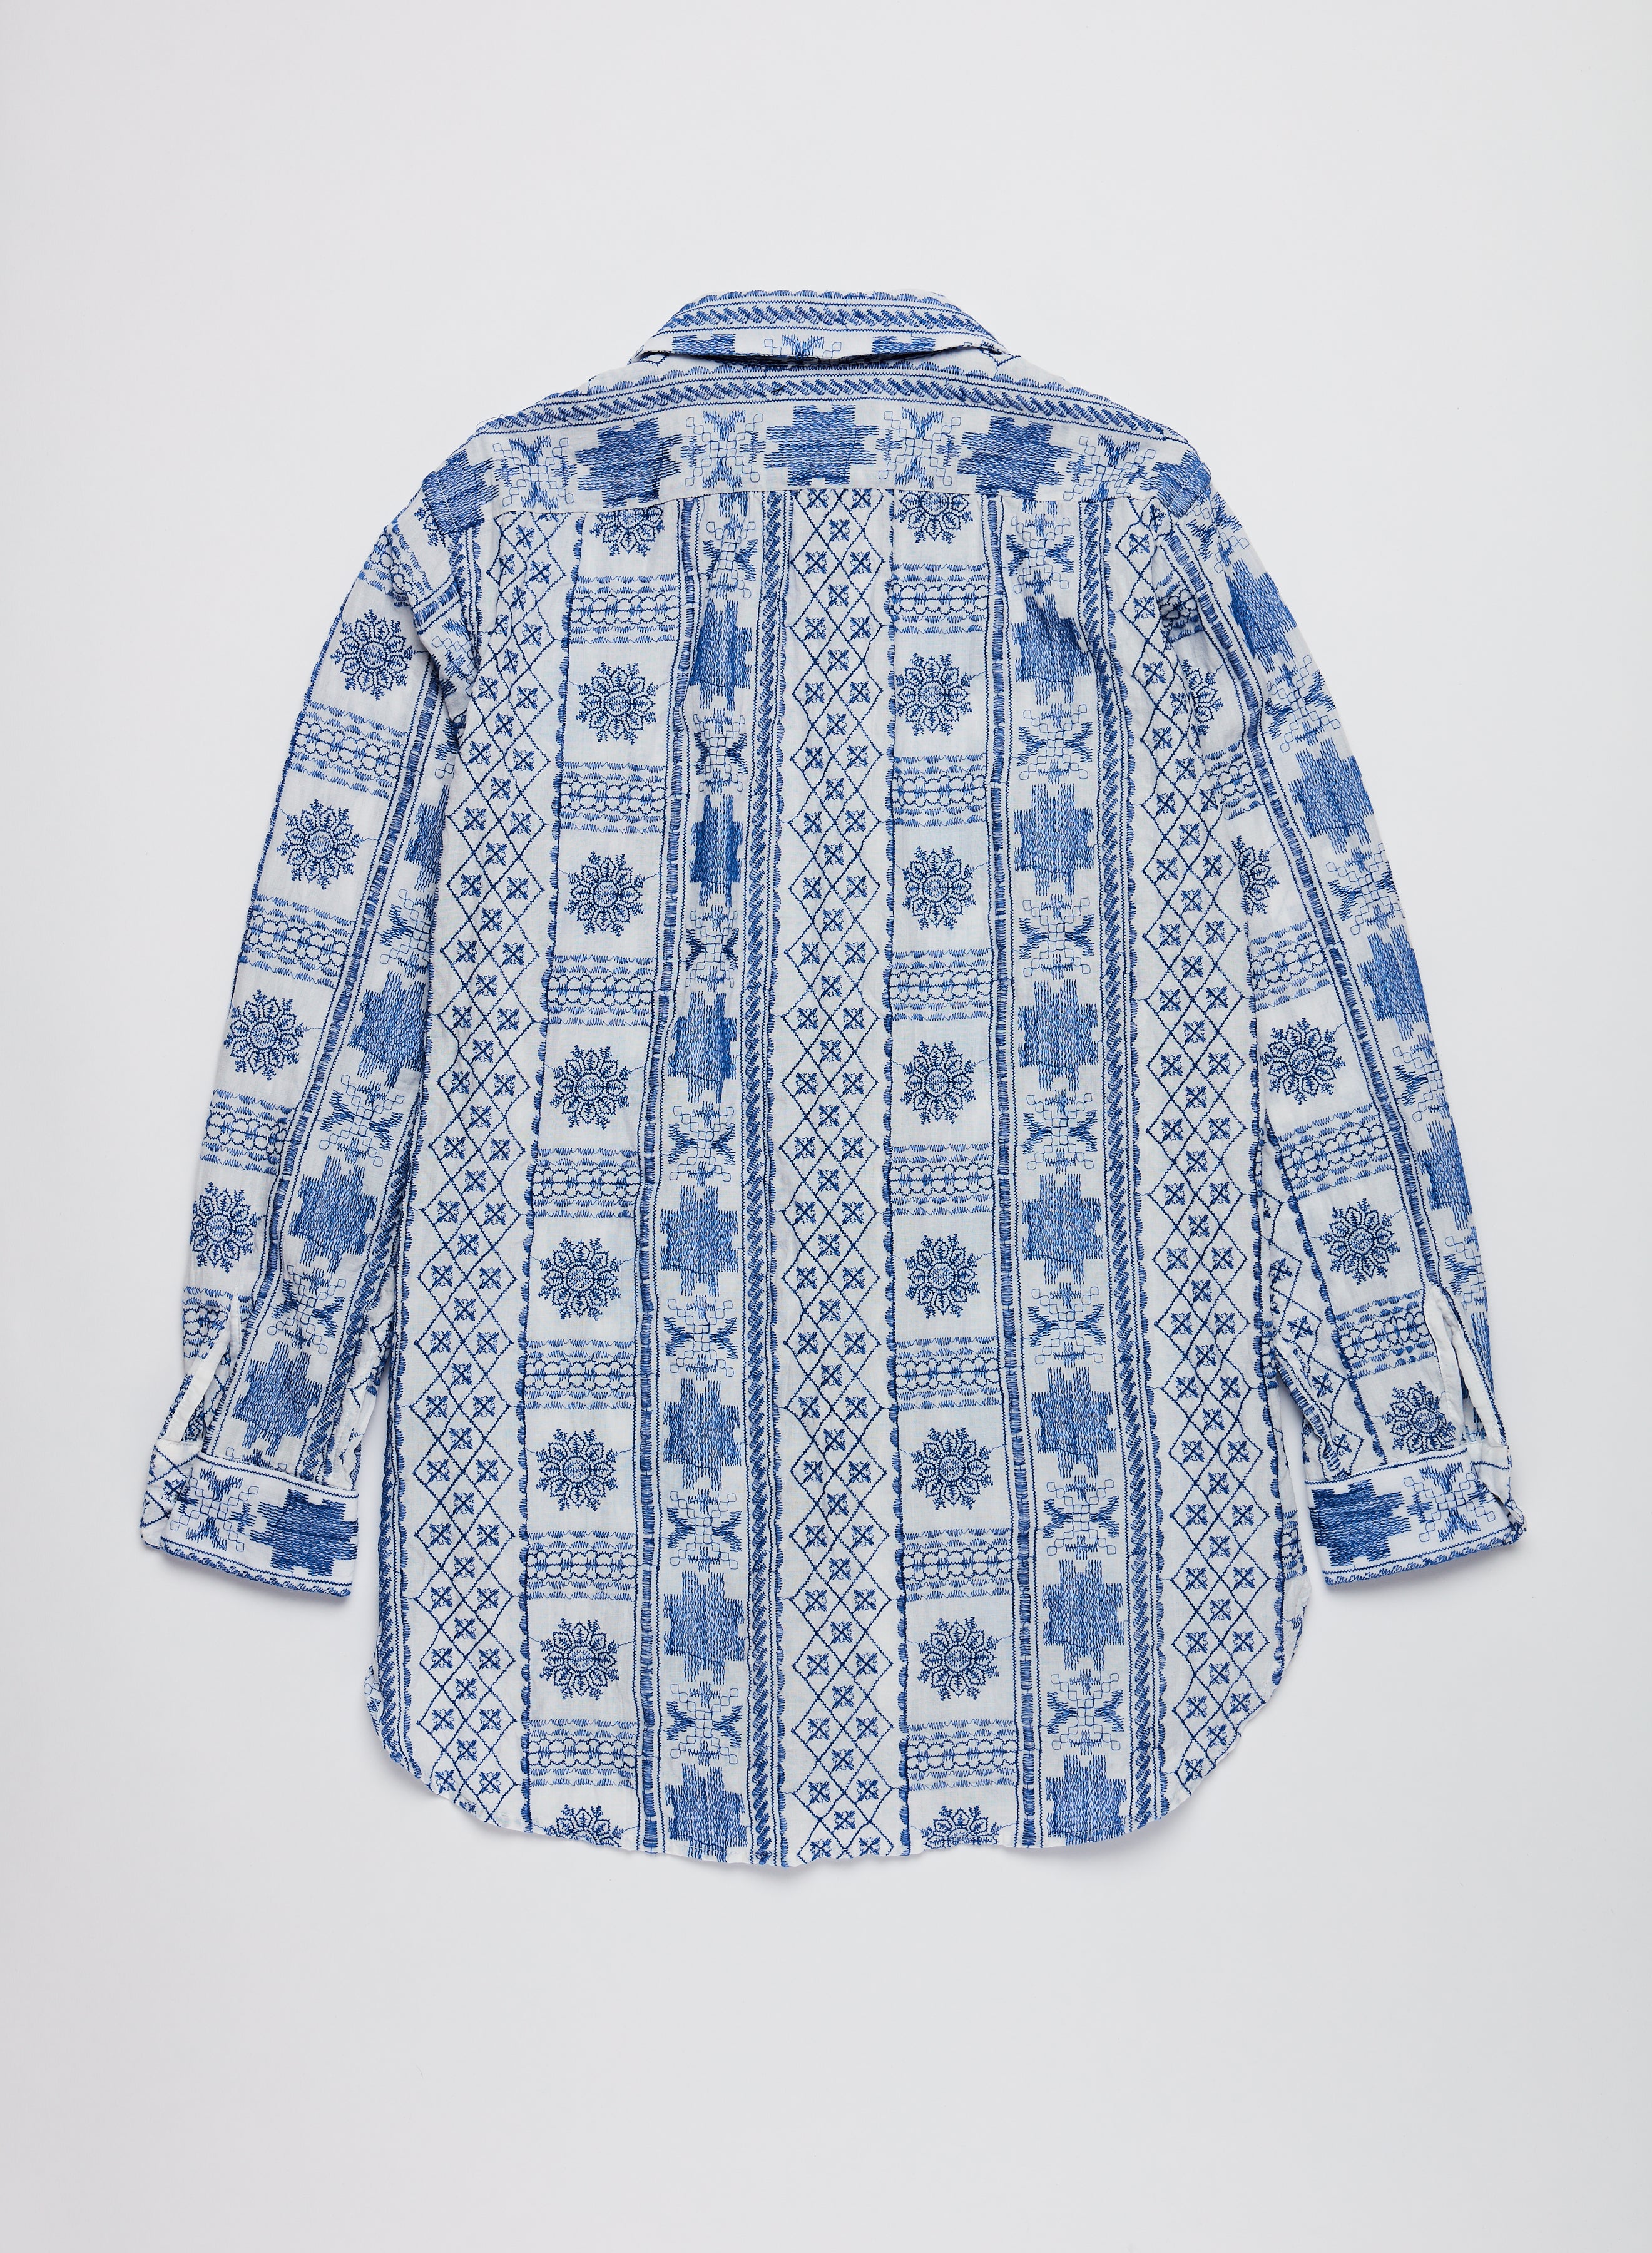 Rounded Collar Shirt - Blue / White CP Embroidery